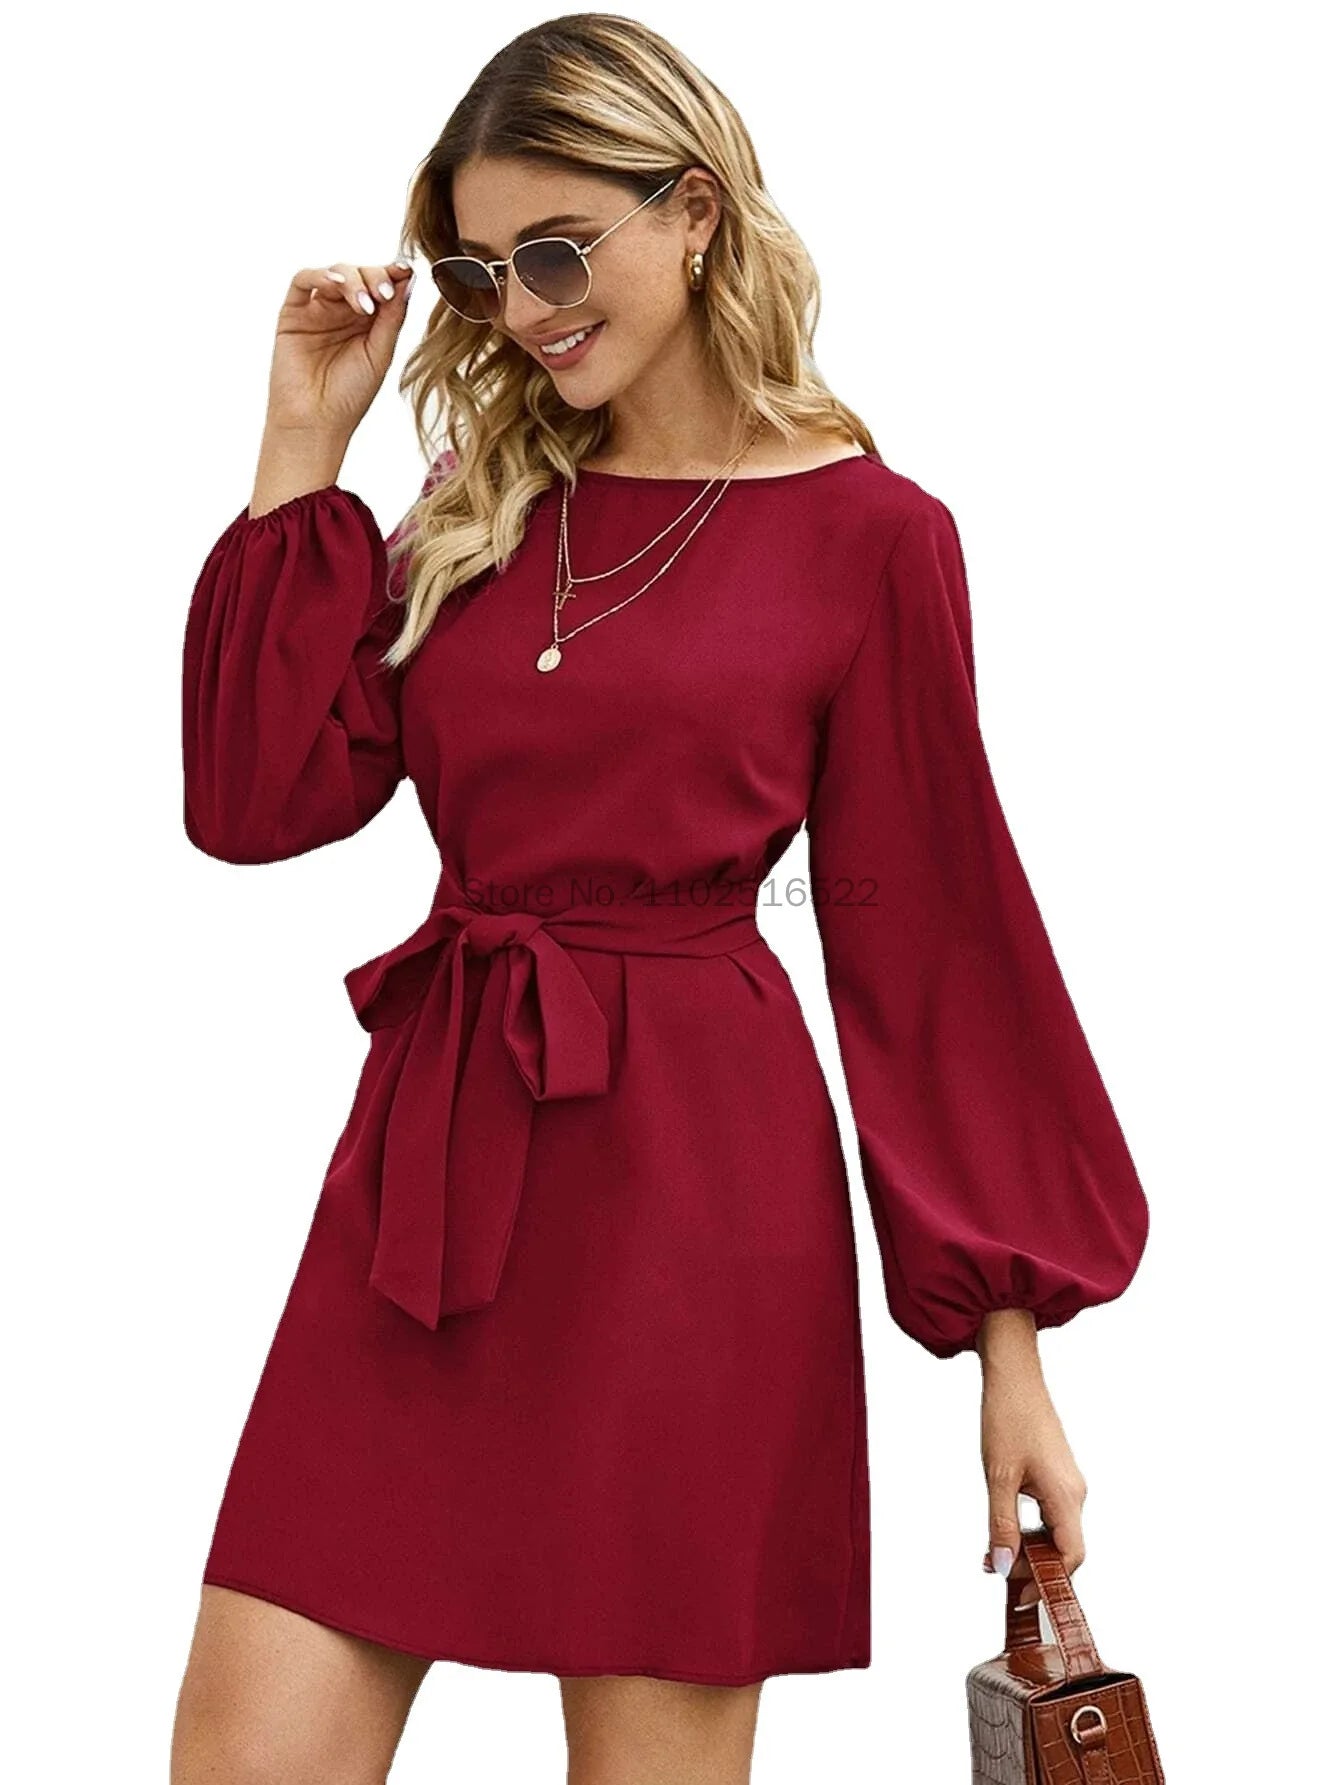 New European and American Women's Solid Color Temperament Commuting Slim Slim Pullover High Waist Dress